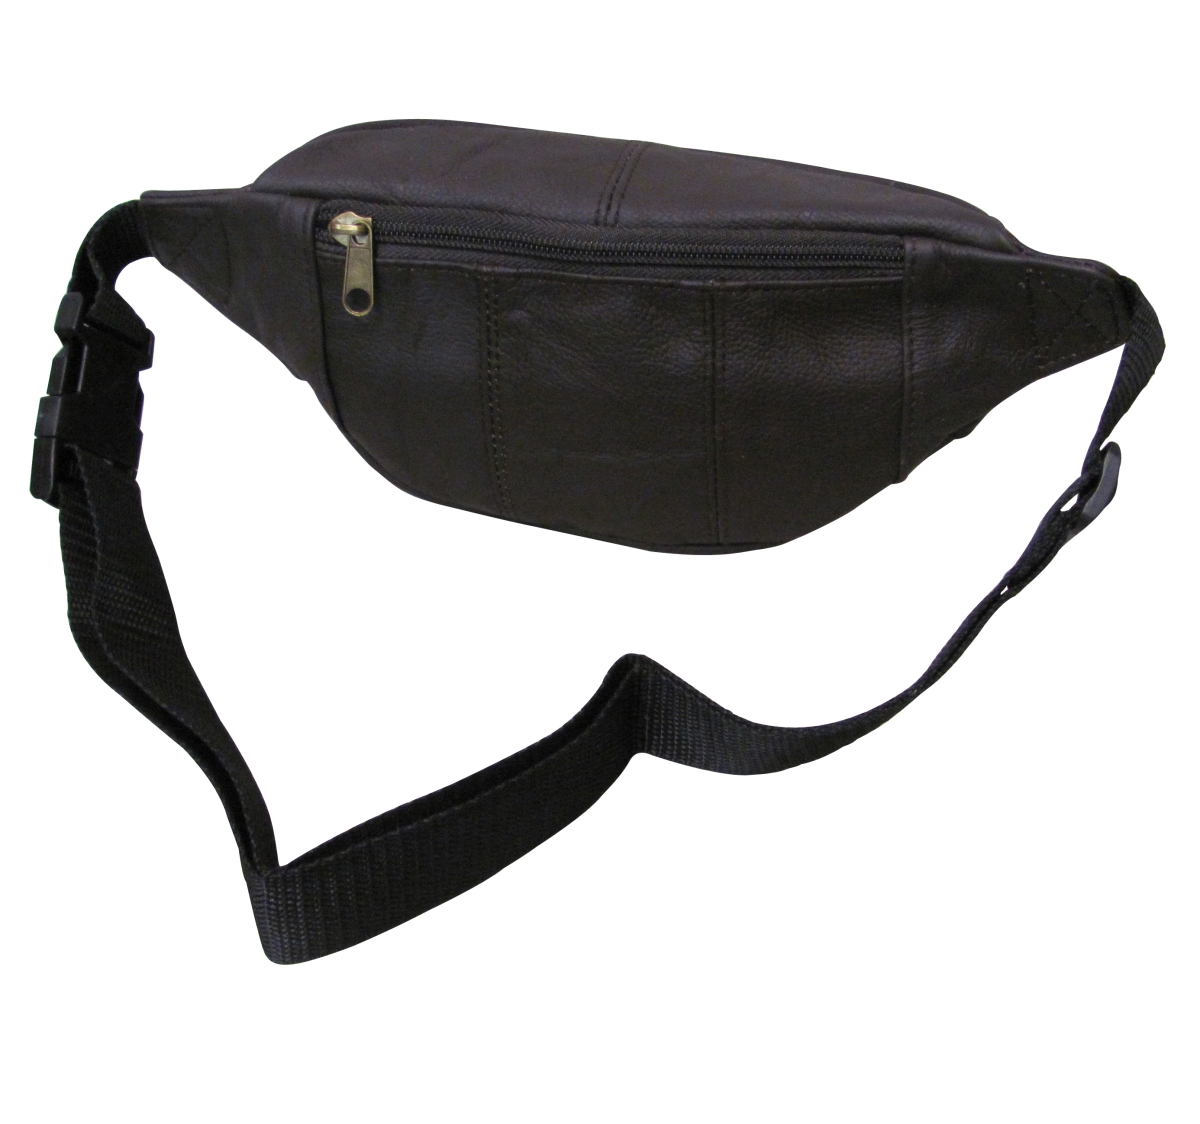 Picture of Amerileather 7310-2 29 x 16 x 13 in. Assorted Leather Fanny Packs